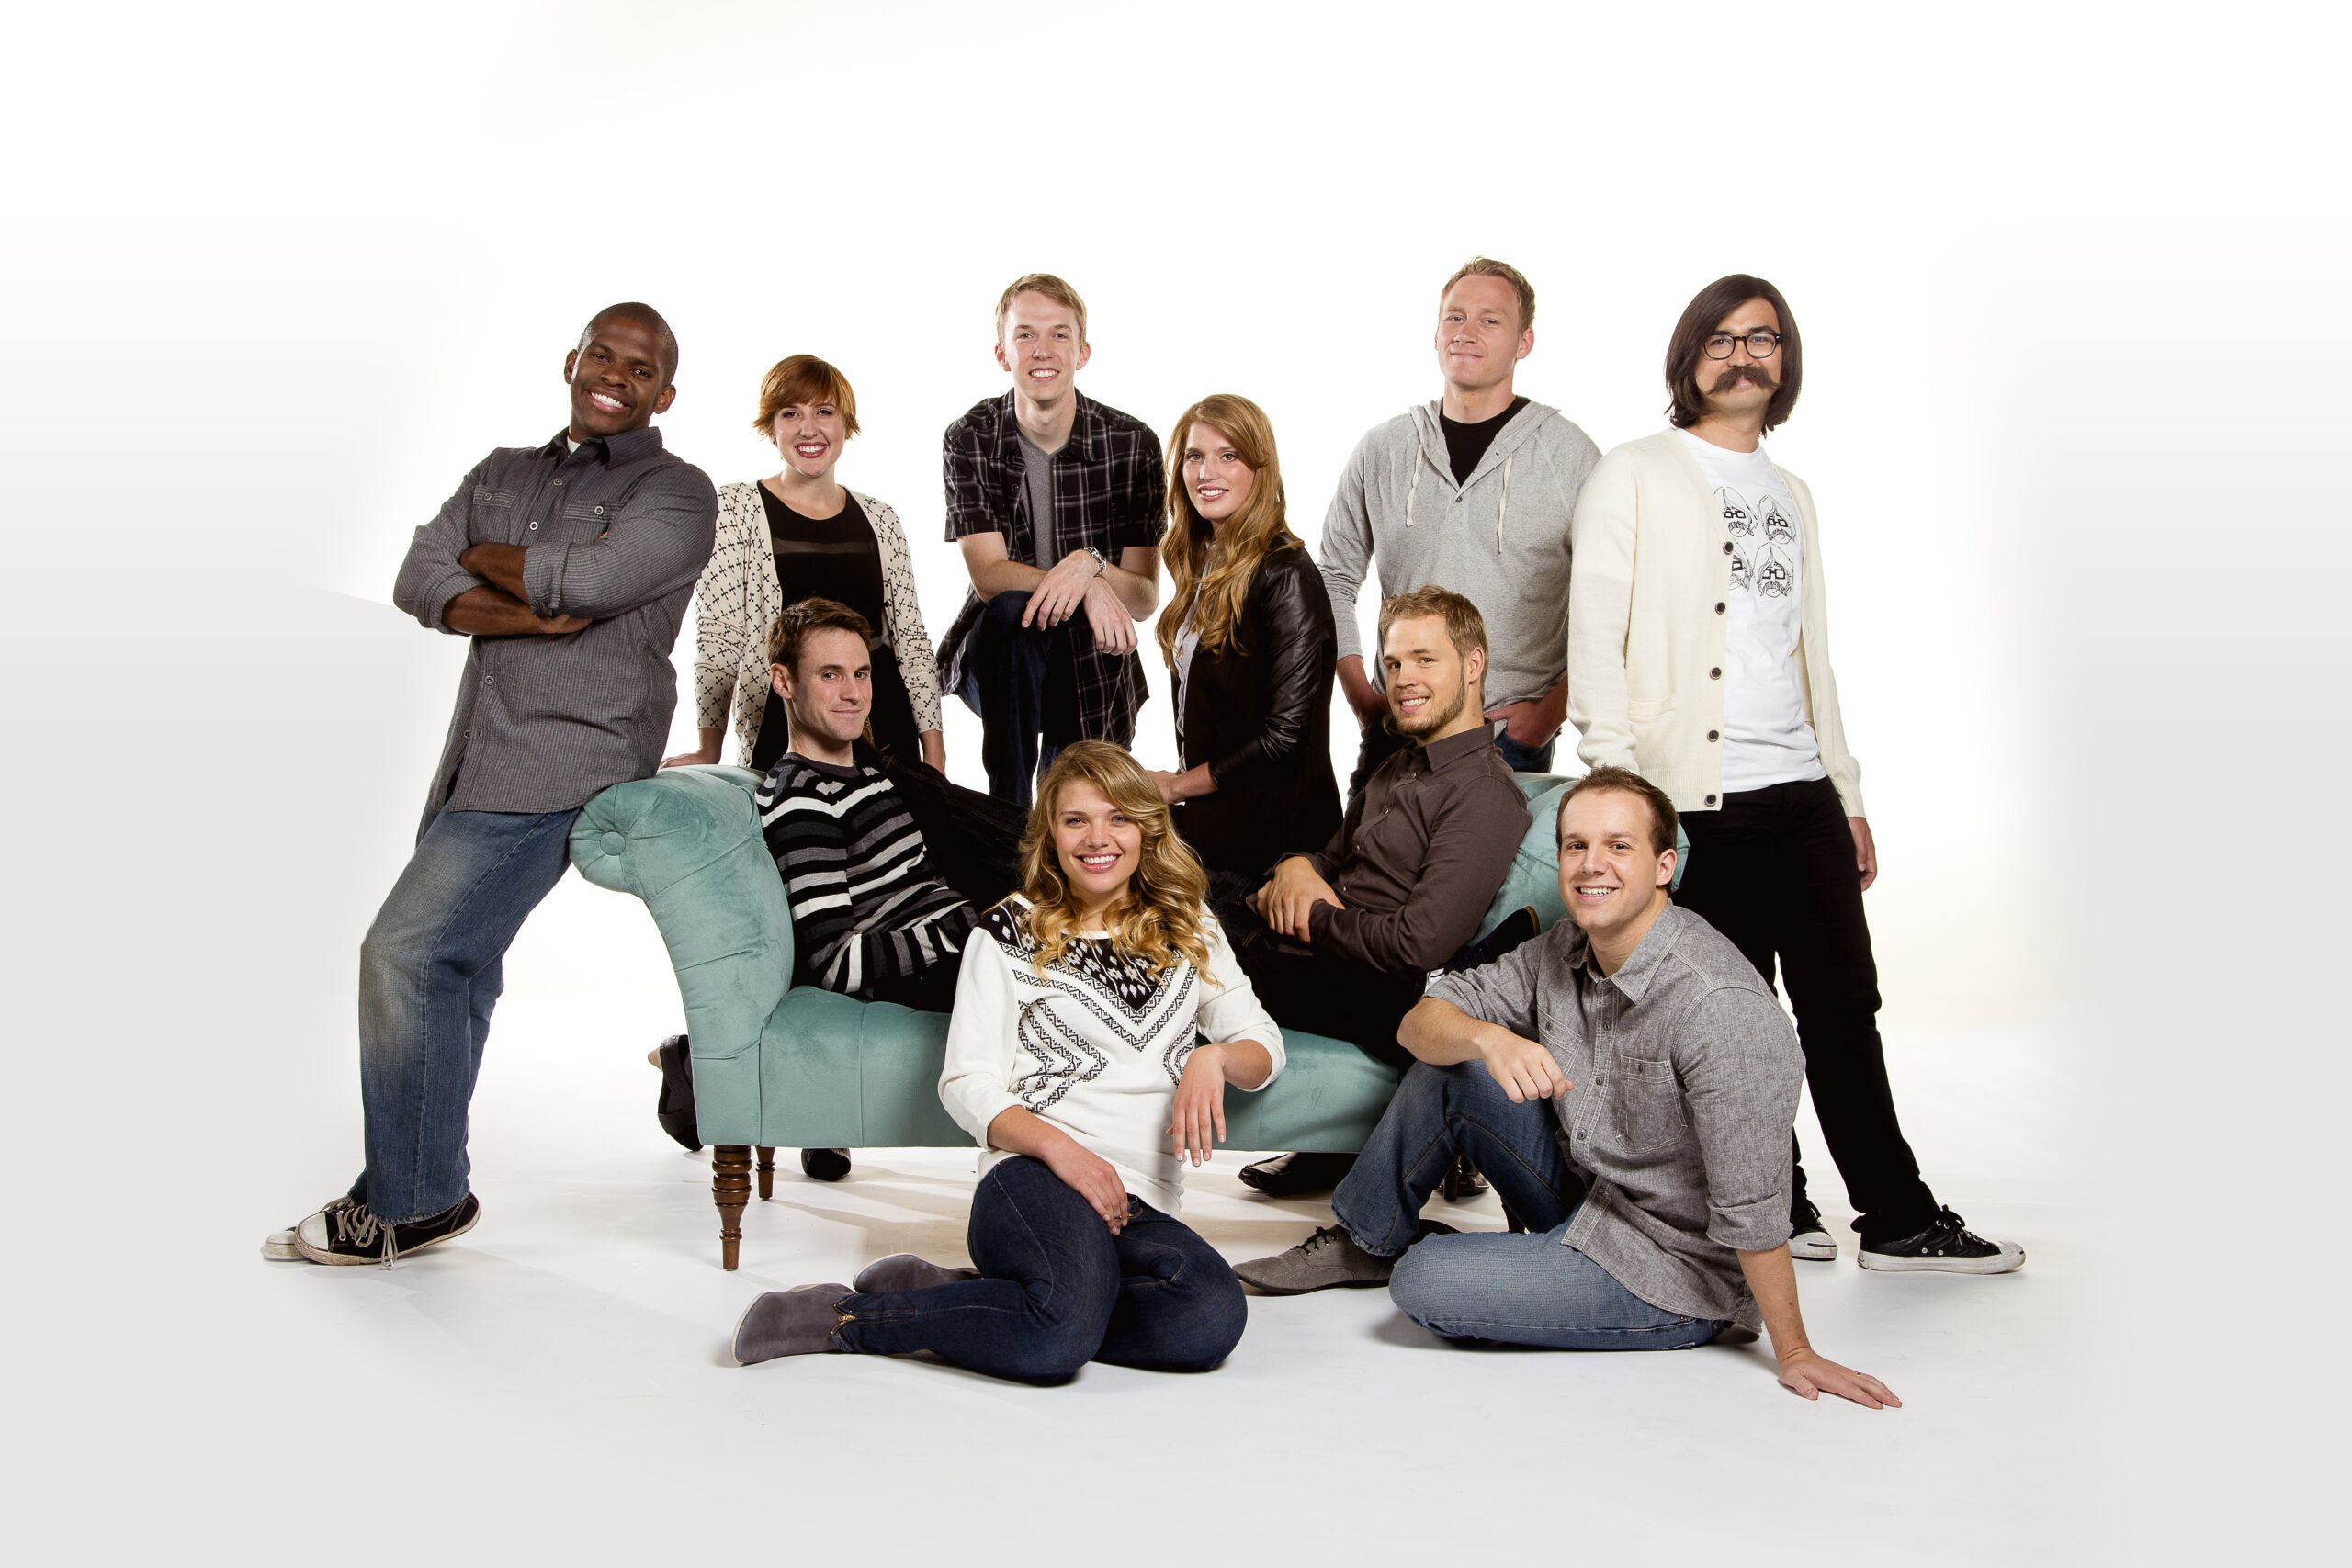 What happened to the old cast of Studio C?